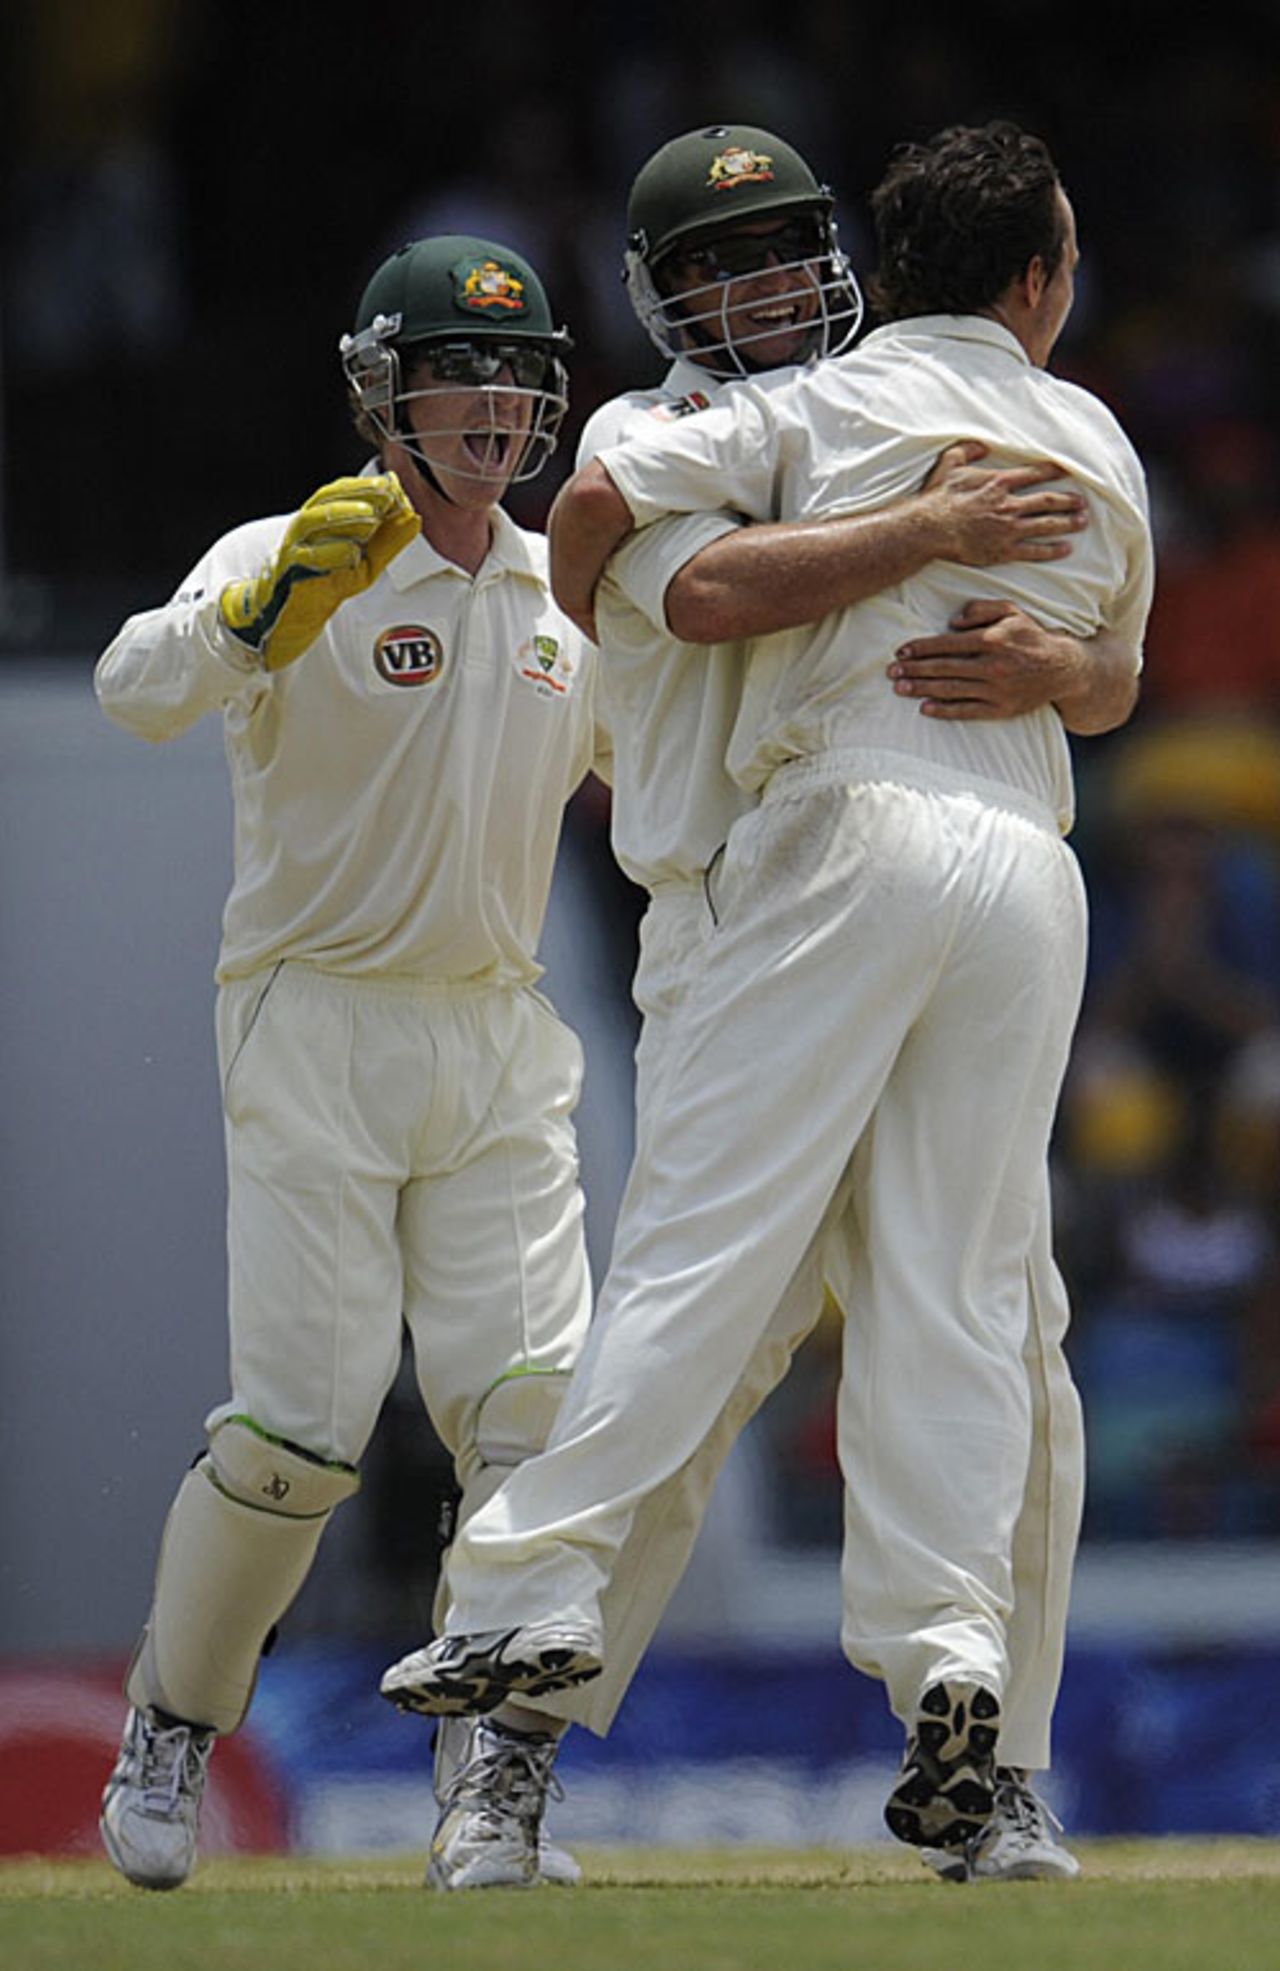 Beau Casson is congratulated on the wicket of Dwayne Bravo, West Indies v Australia, 3rd Test, Barbados, 5th day, June 16, 2008